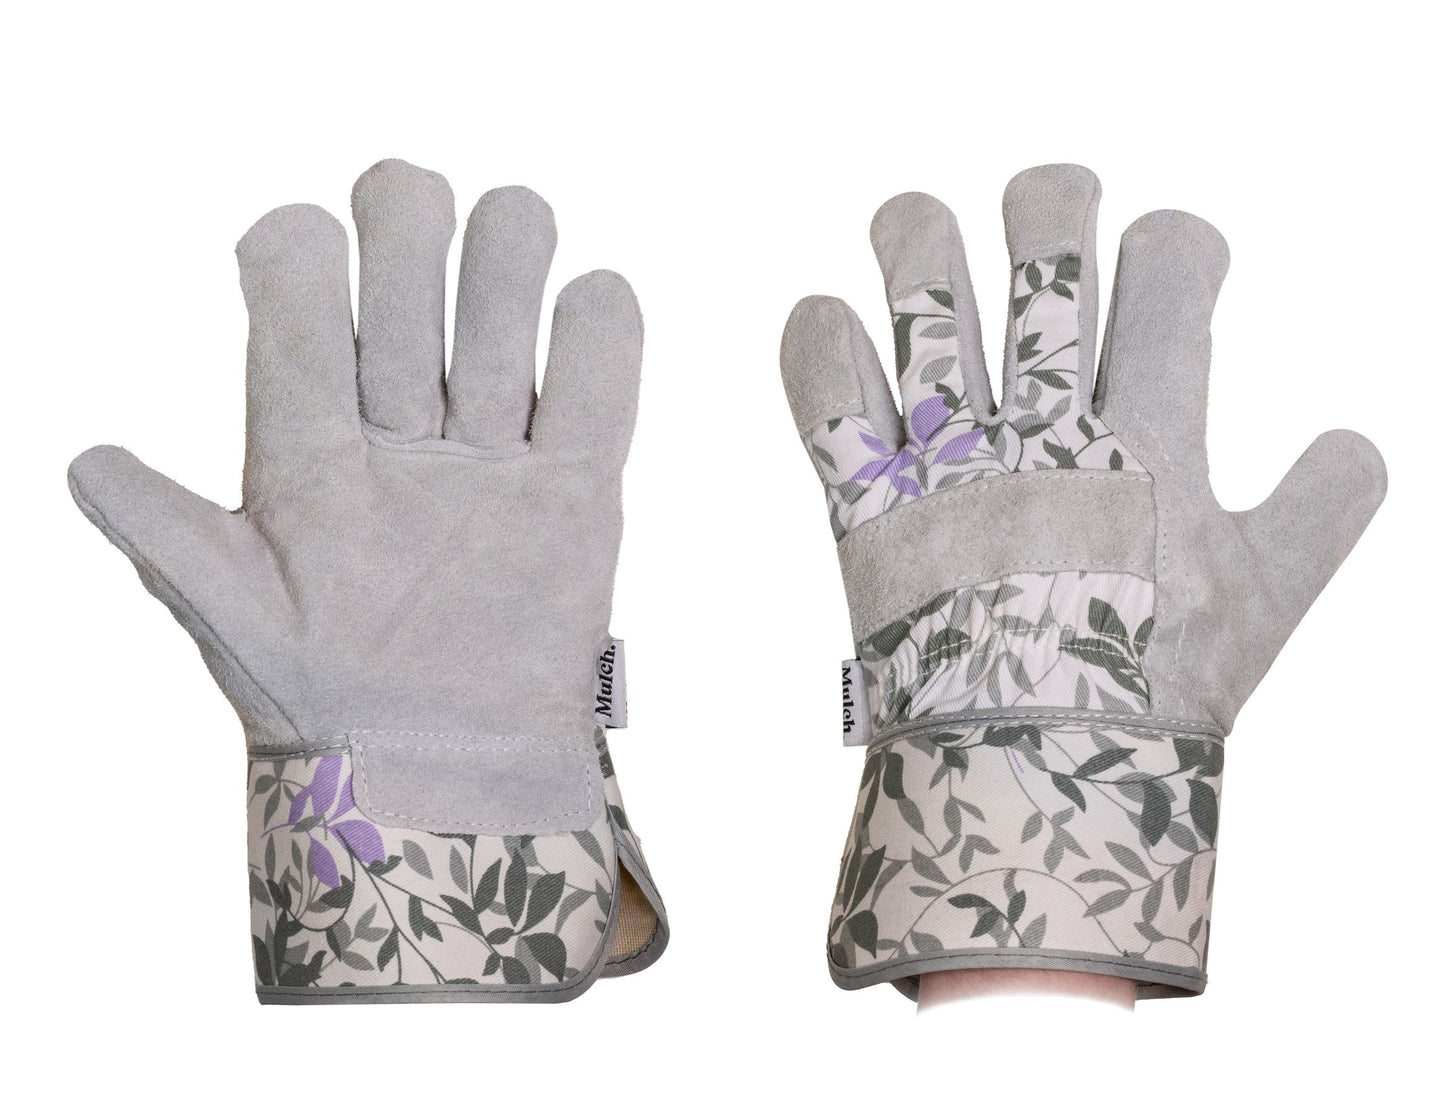 The Thornstar - As voted the best thornproof glove by The Telegraph newspaper!